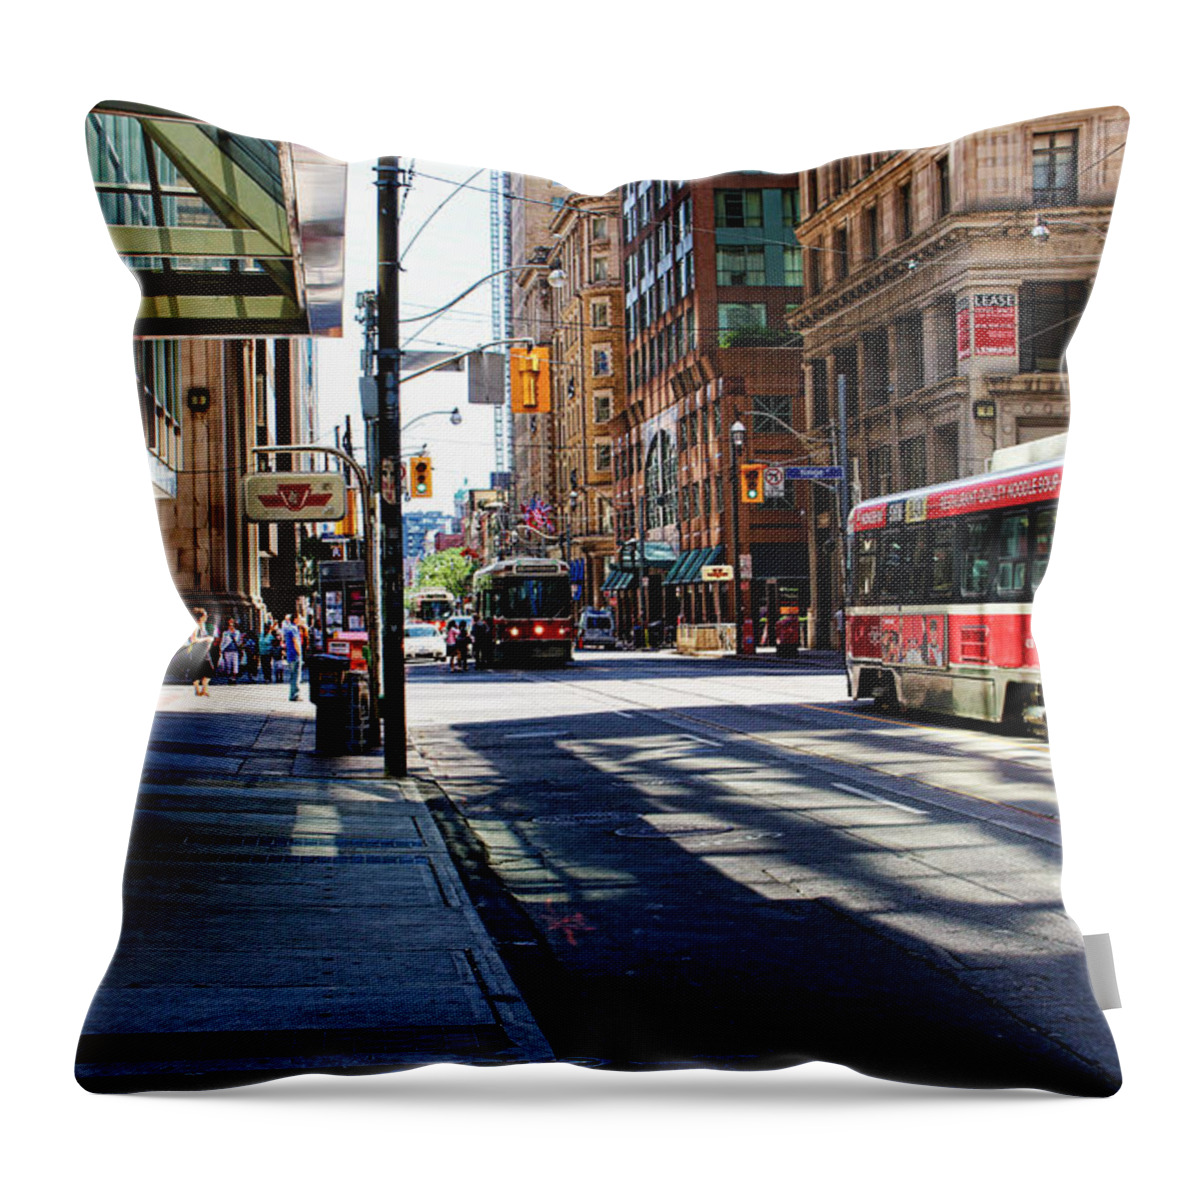 King Street East Throw Pillow featuring the photograph King Street East by Nicky Jameson